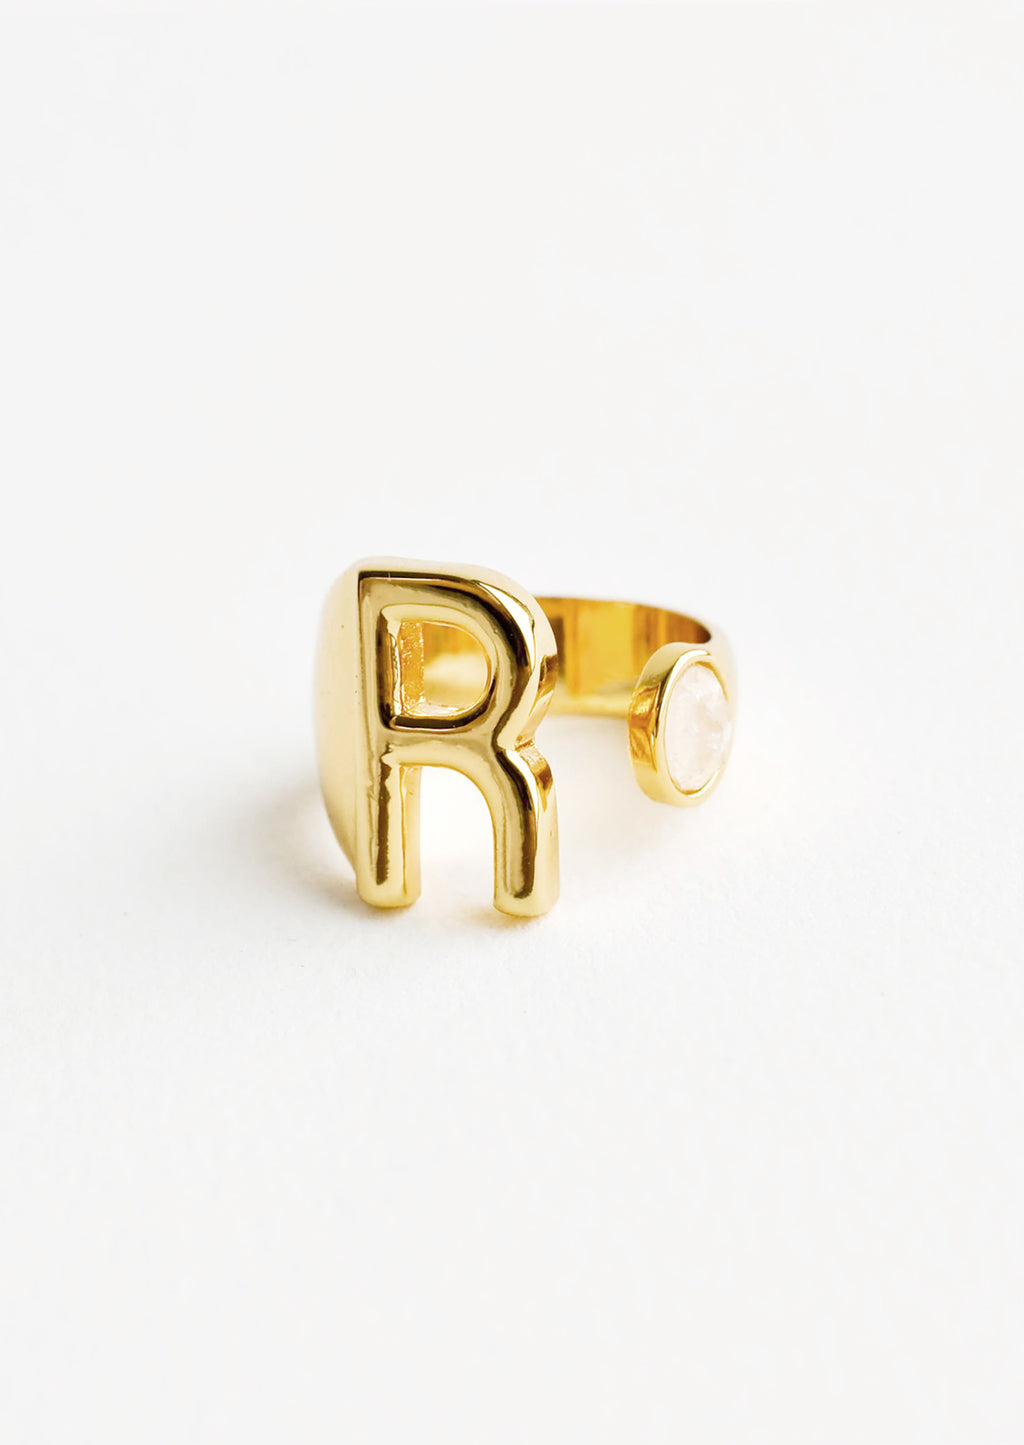 R: Yellow gold ring with letter R and oval glass crystal, and wide adjustable band.